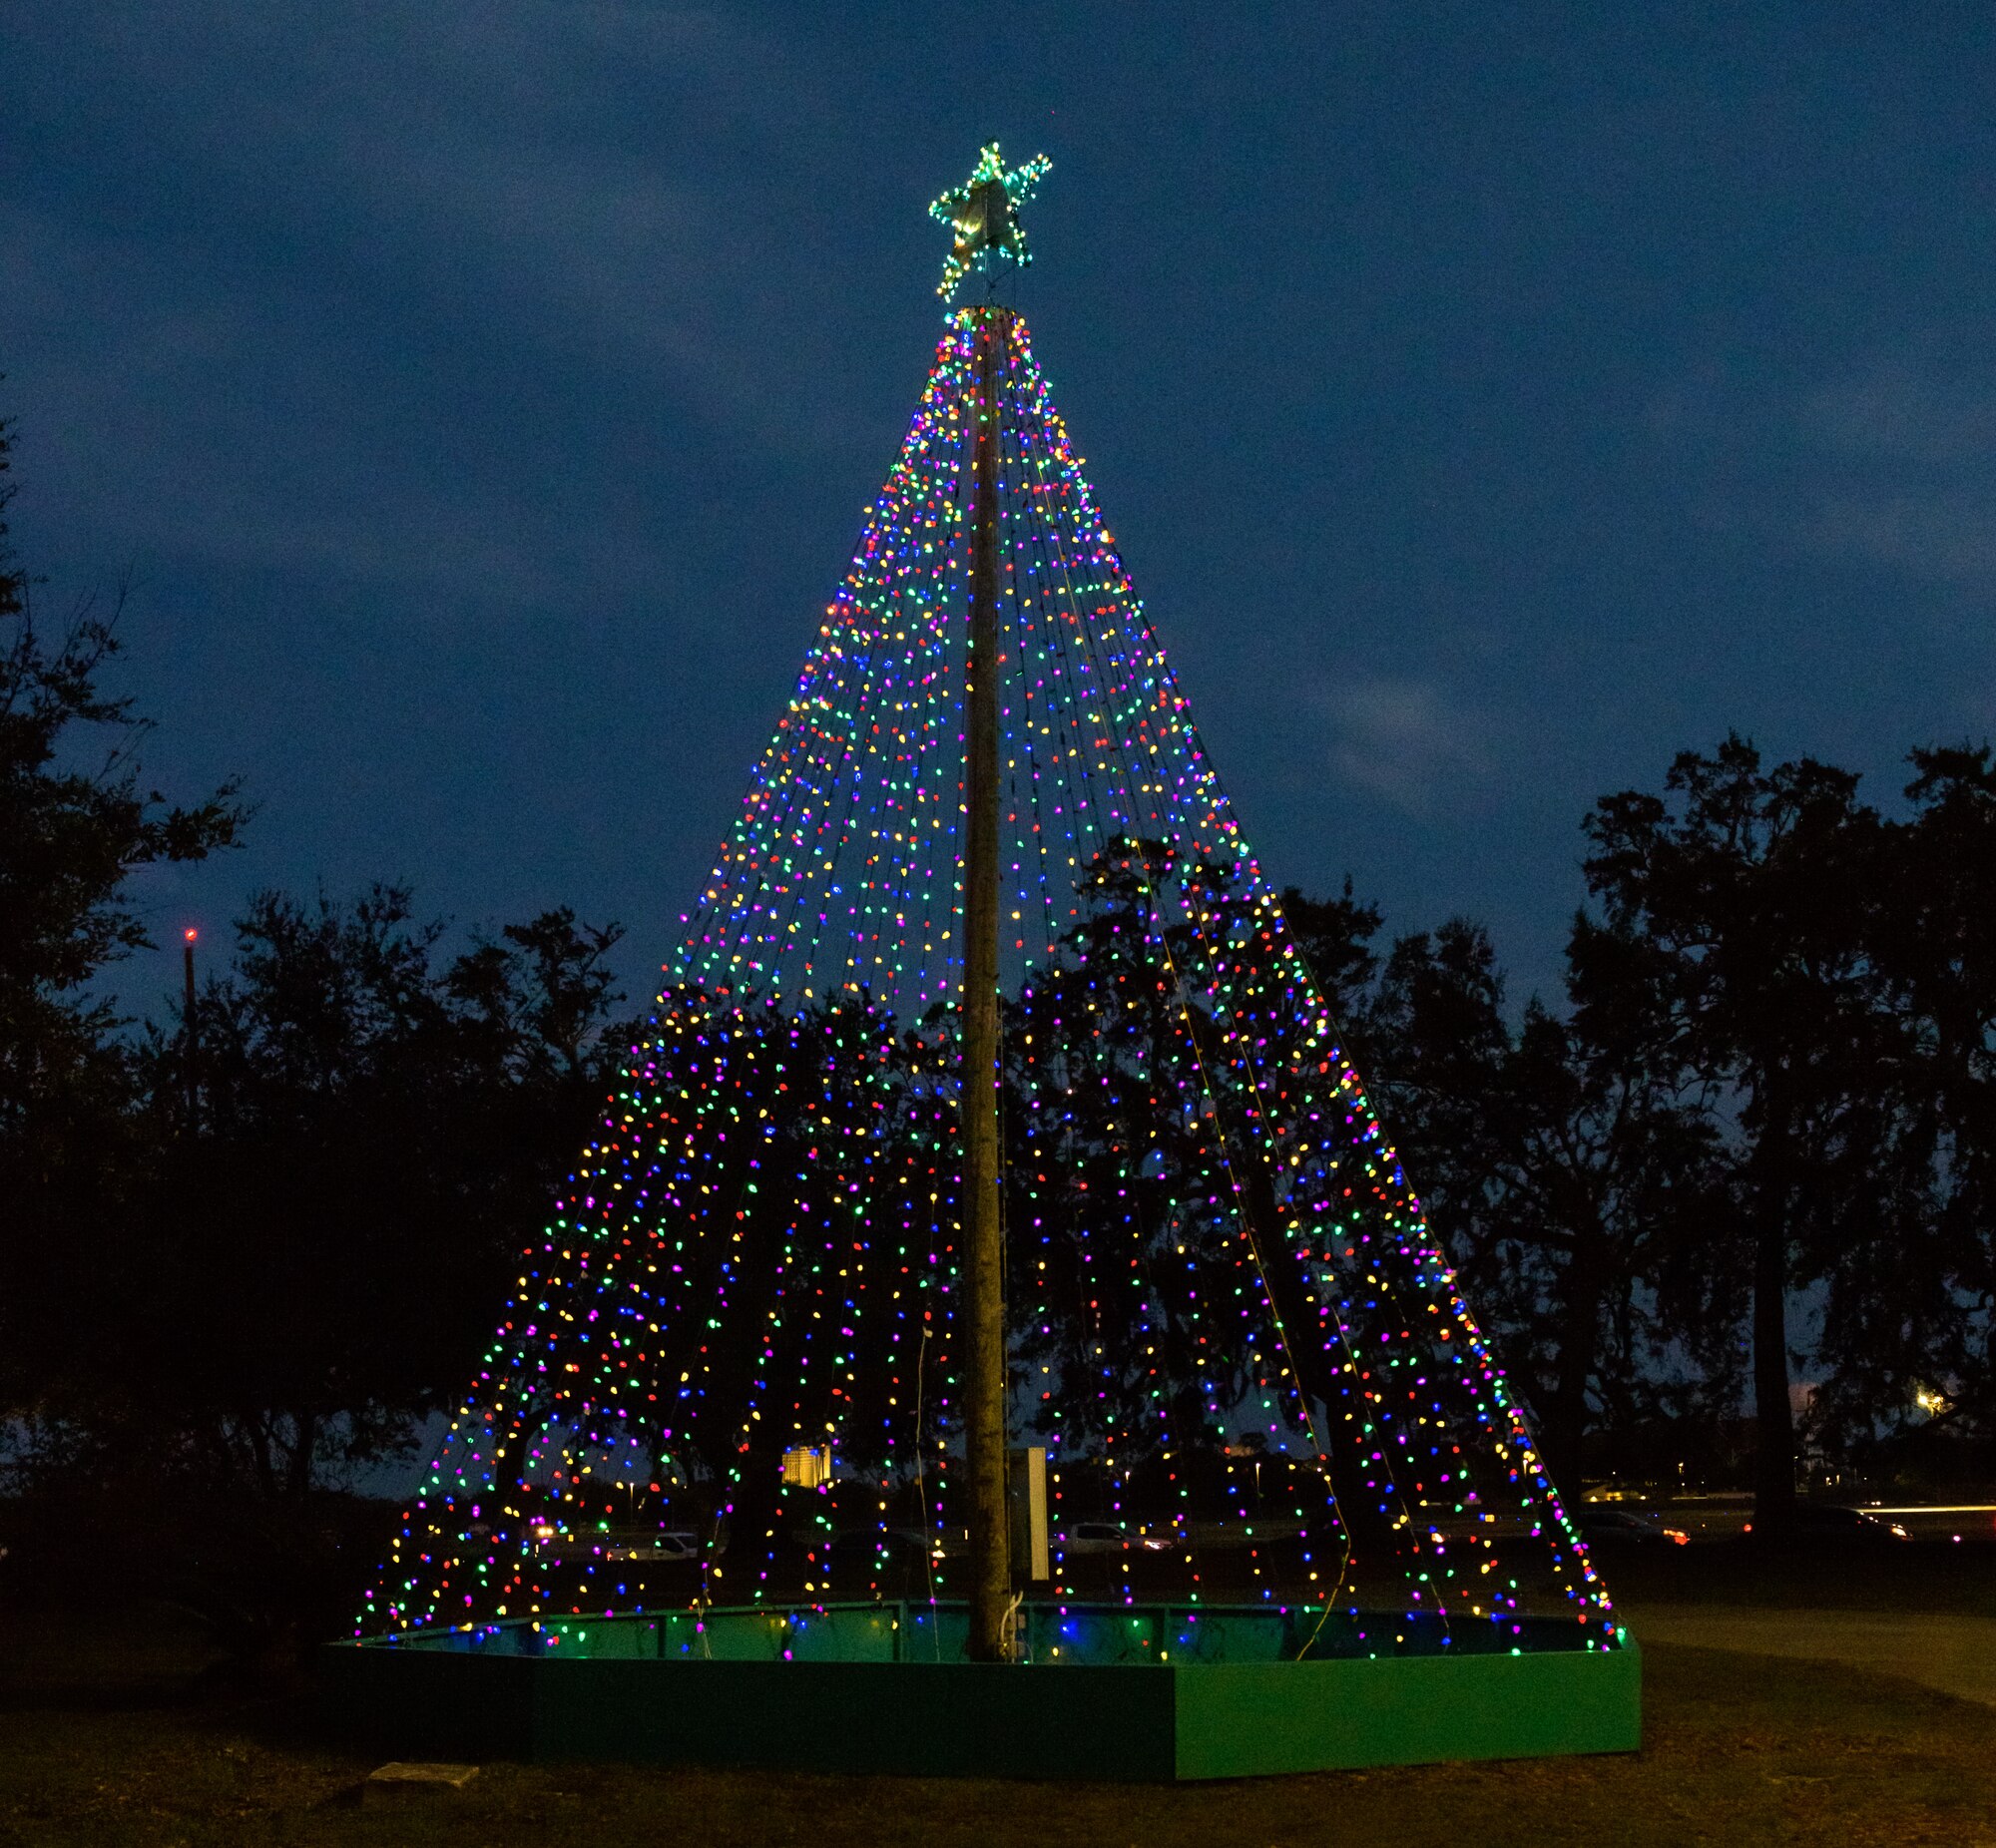 A Christmas tree is on display during Keesler's annual Christmas in the Park drive-thru celebration at Marina Park at Keesler Air Force Base, Mississippi, Dec. 4, 2020. The celebration, hosted by Outdoor Recreation, included light displays, hot chocolate and letters to Santa. (U.S. Air Force photo by Andre' Askew)